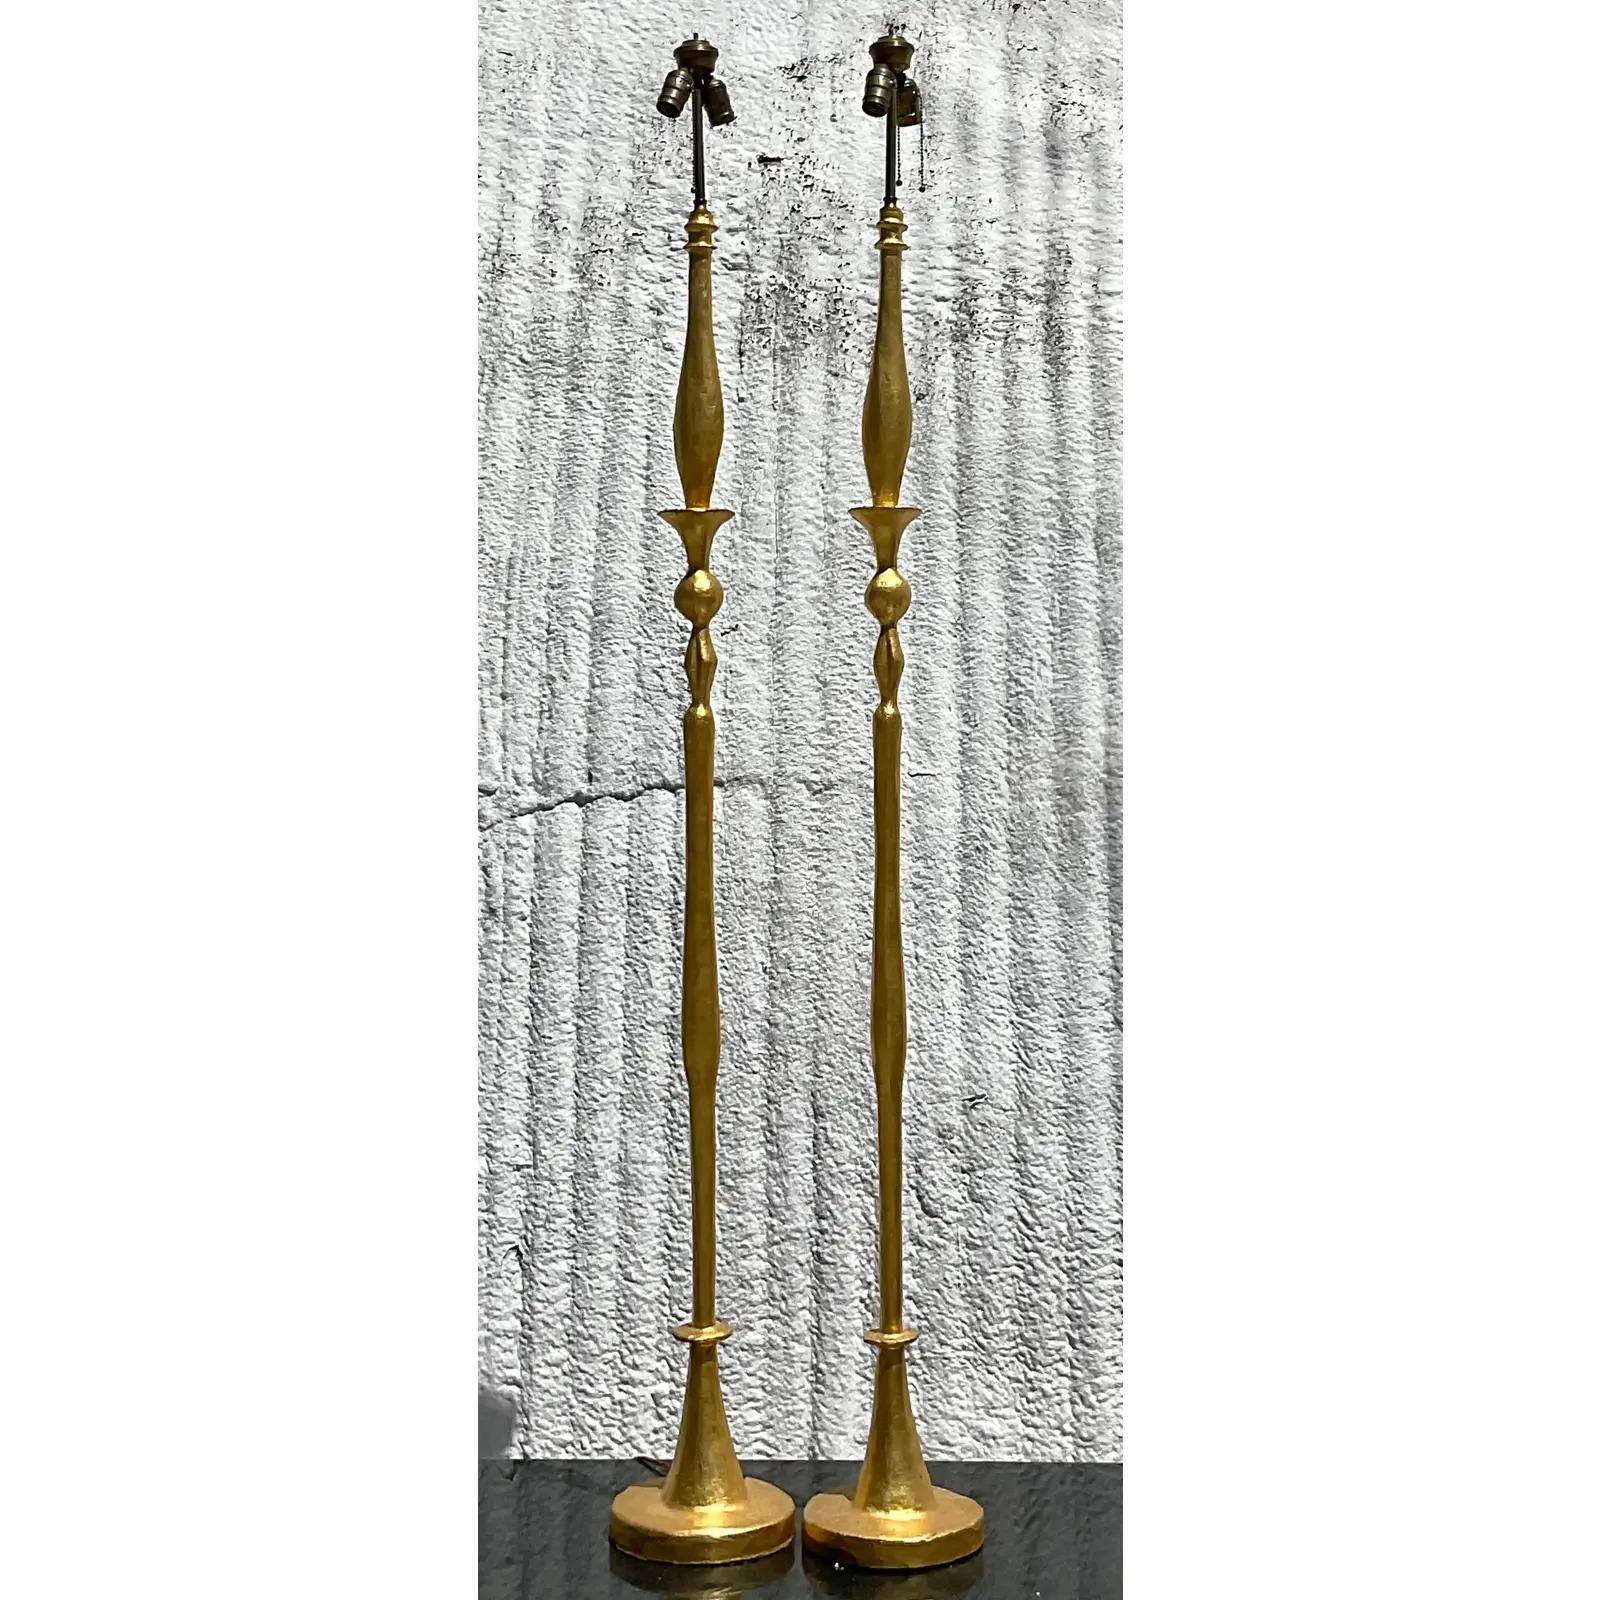 North American Vintage Regency Frances Elkins Sculpted Floor Lamps After Giacometti, a Pair